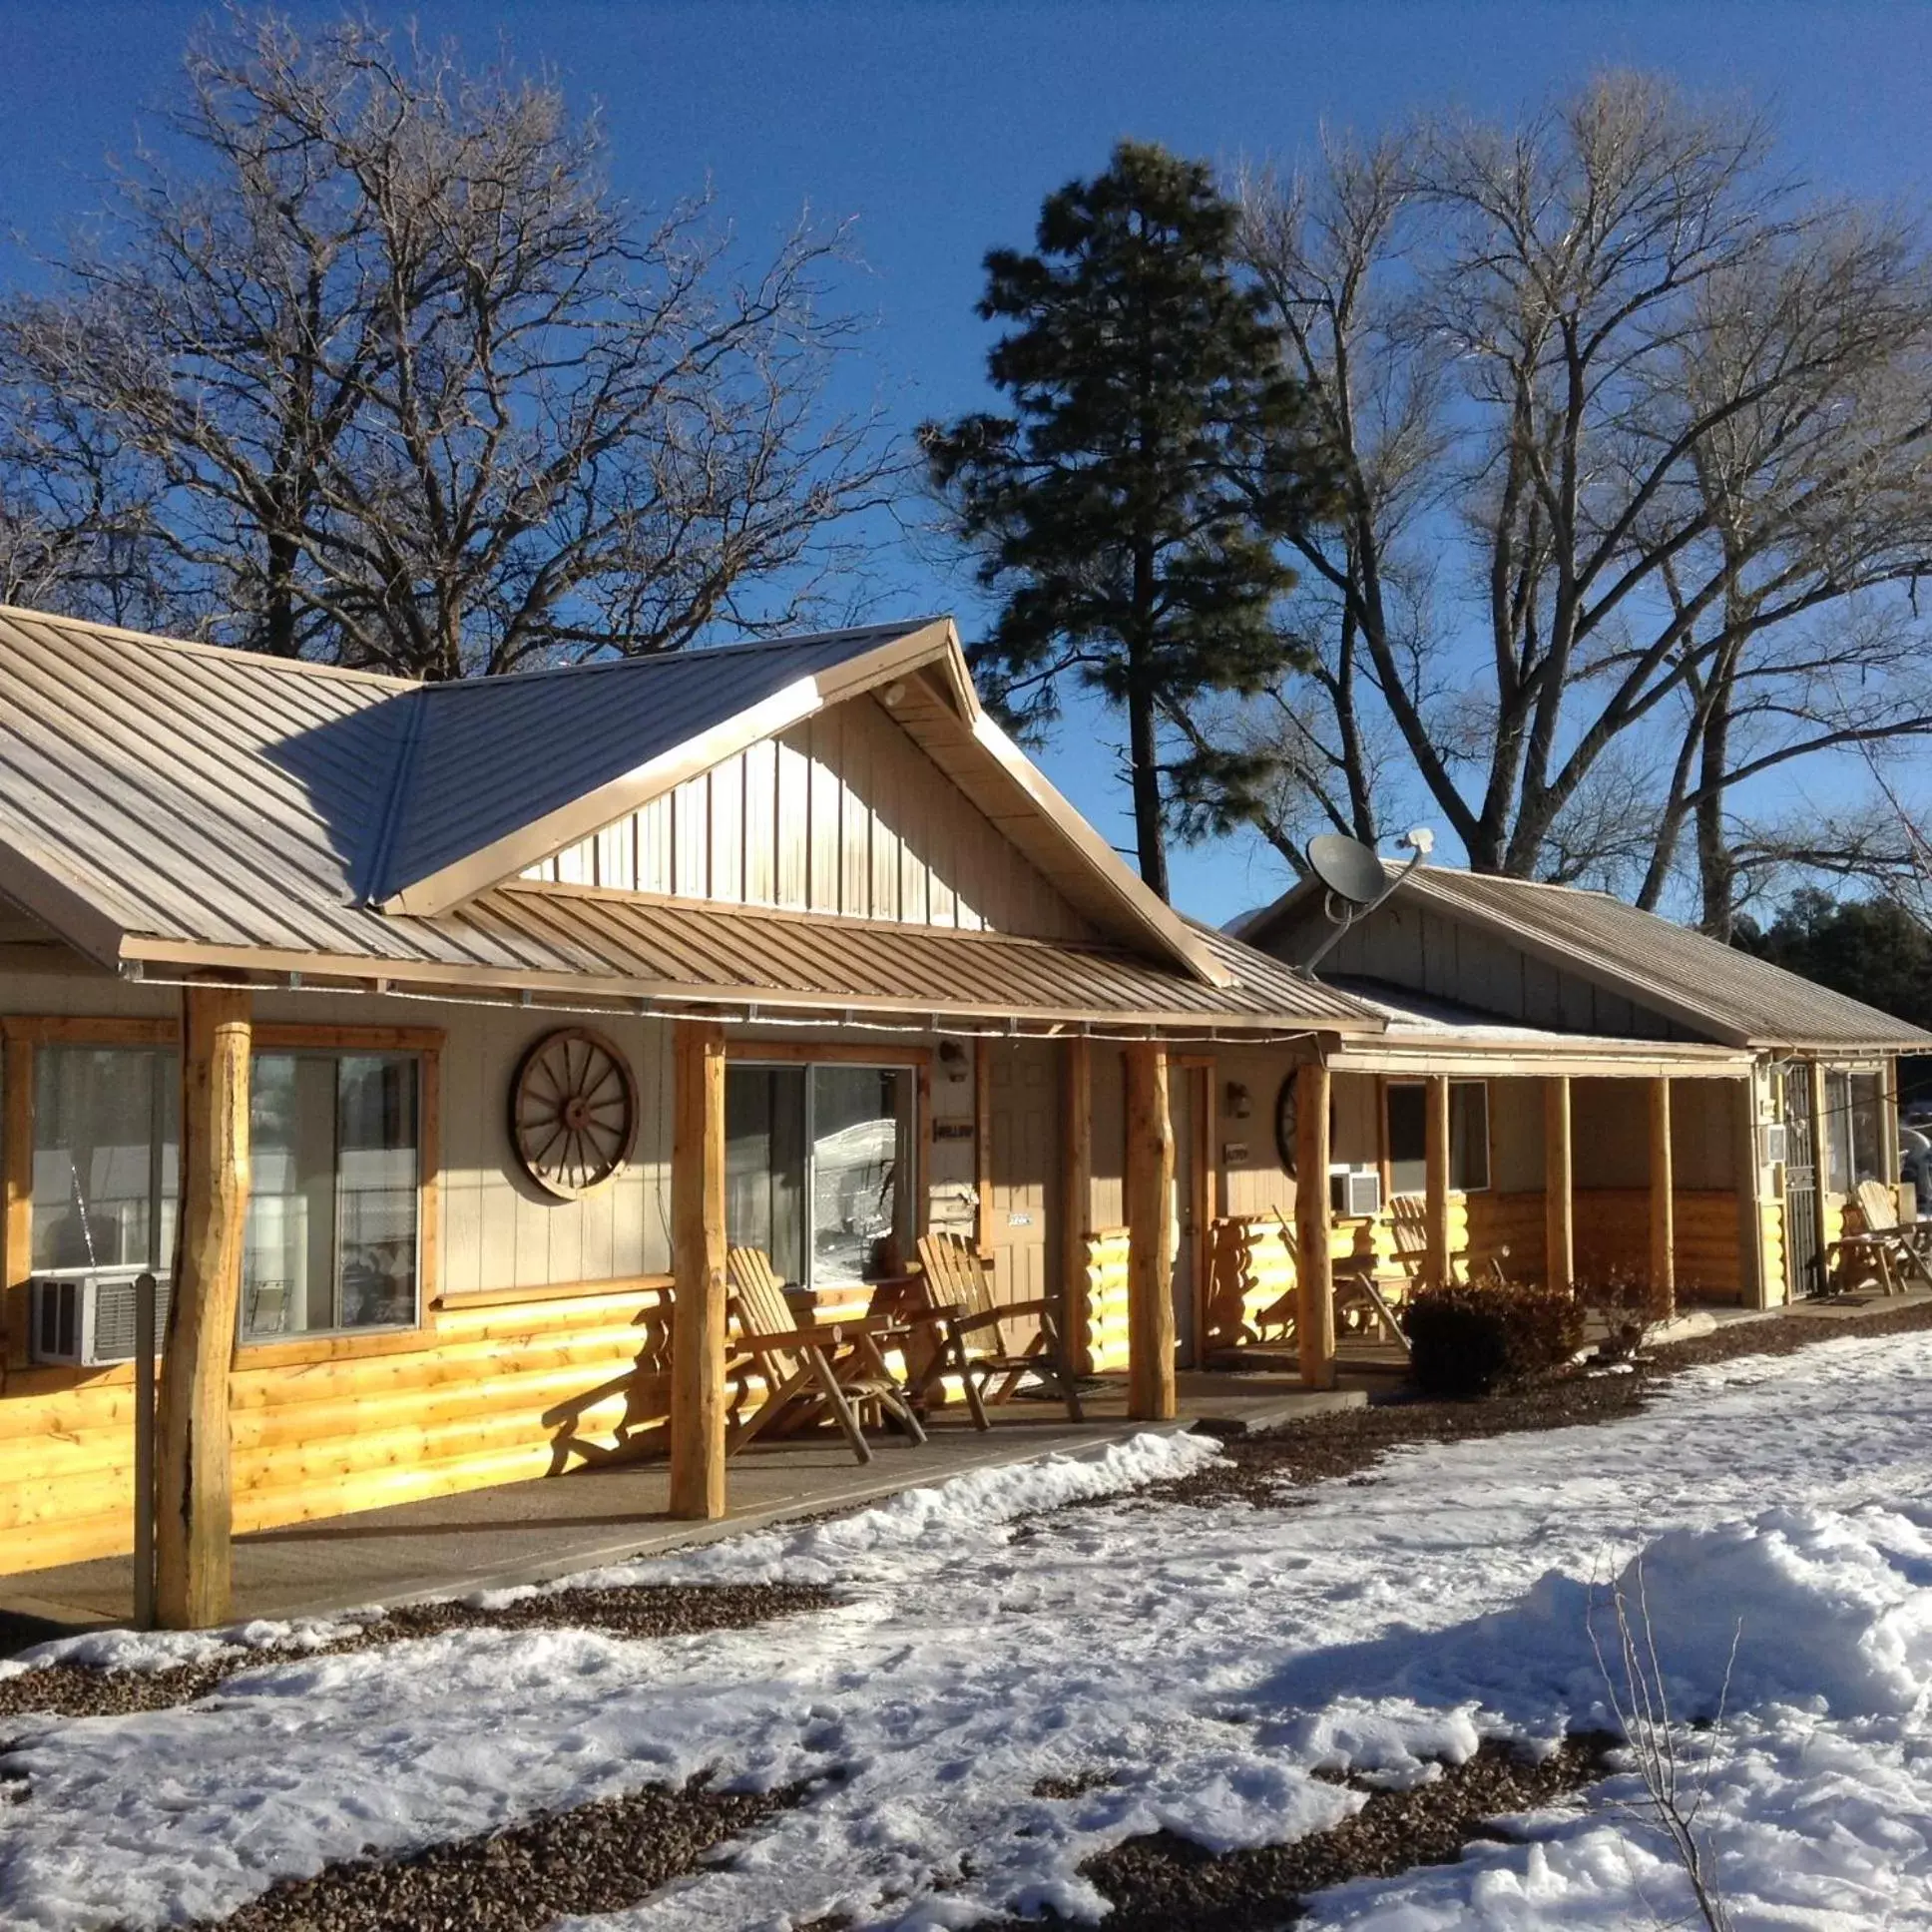 Property building, Winter in Rainbows End Fishing Resort